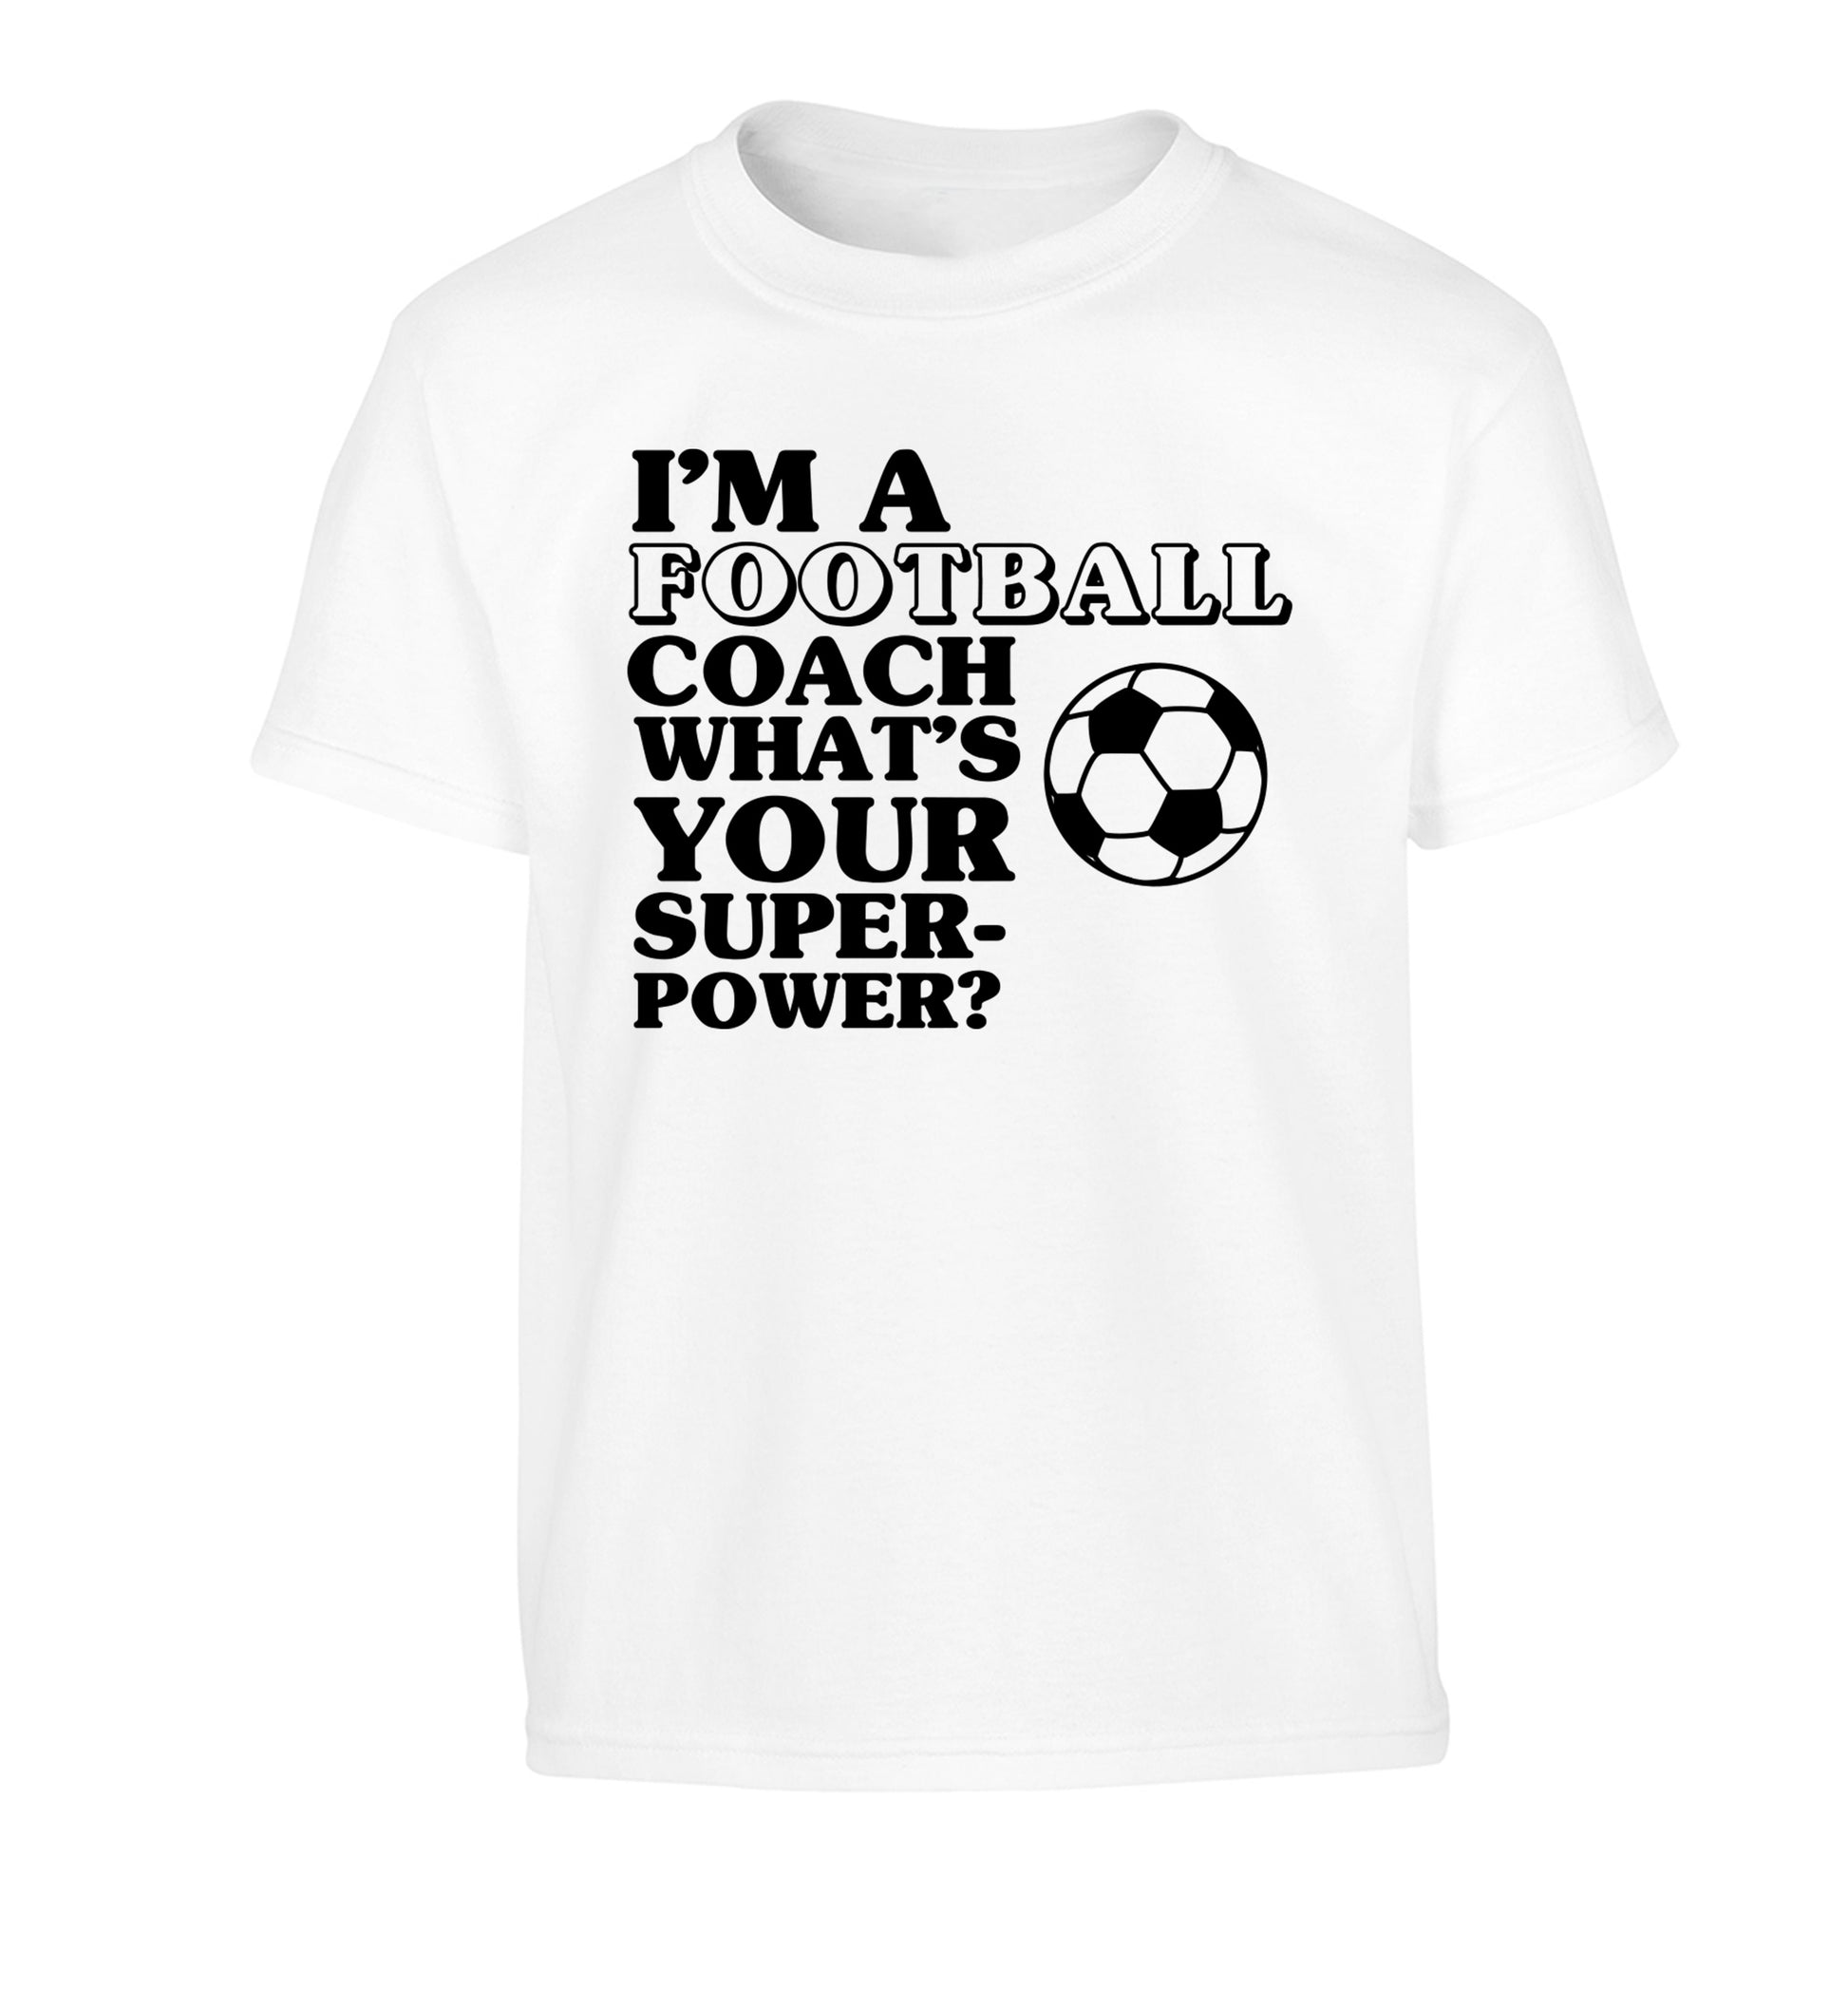 I'm a football coach what's your superpower? Children's white Tshirt 12-14 Years